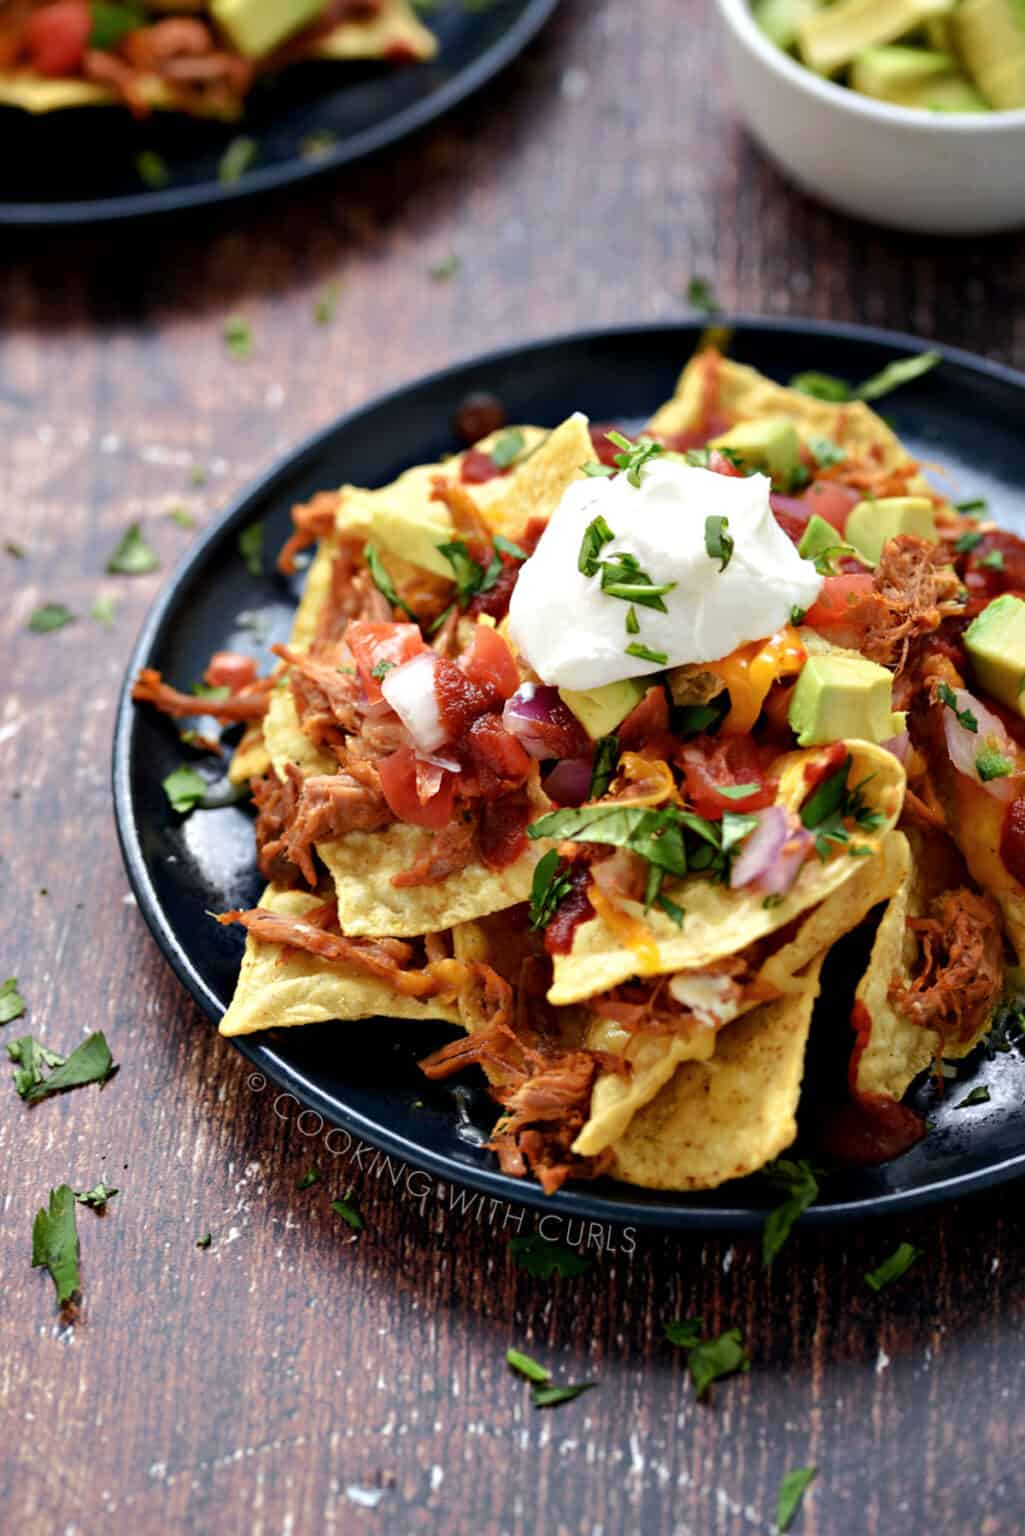 Pulled Pork Nachos Recipe - Cooking with Curls